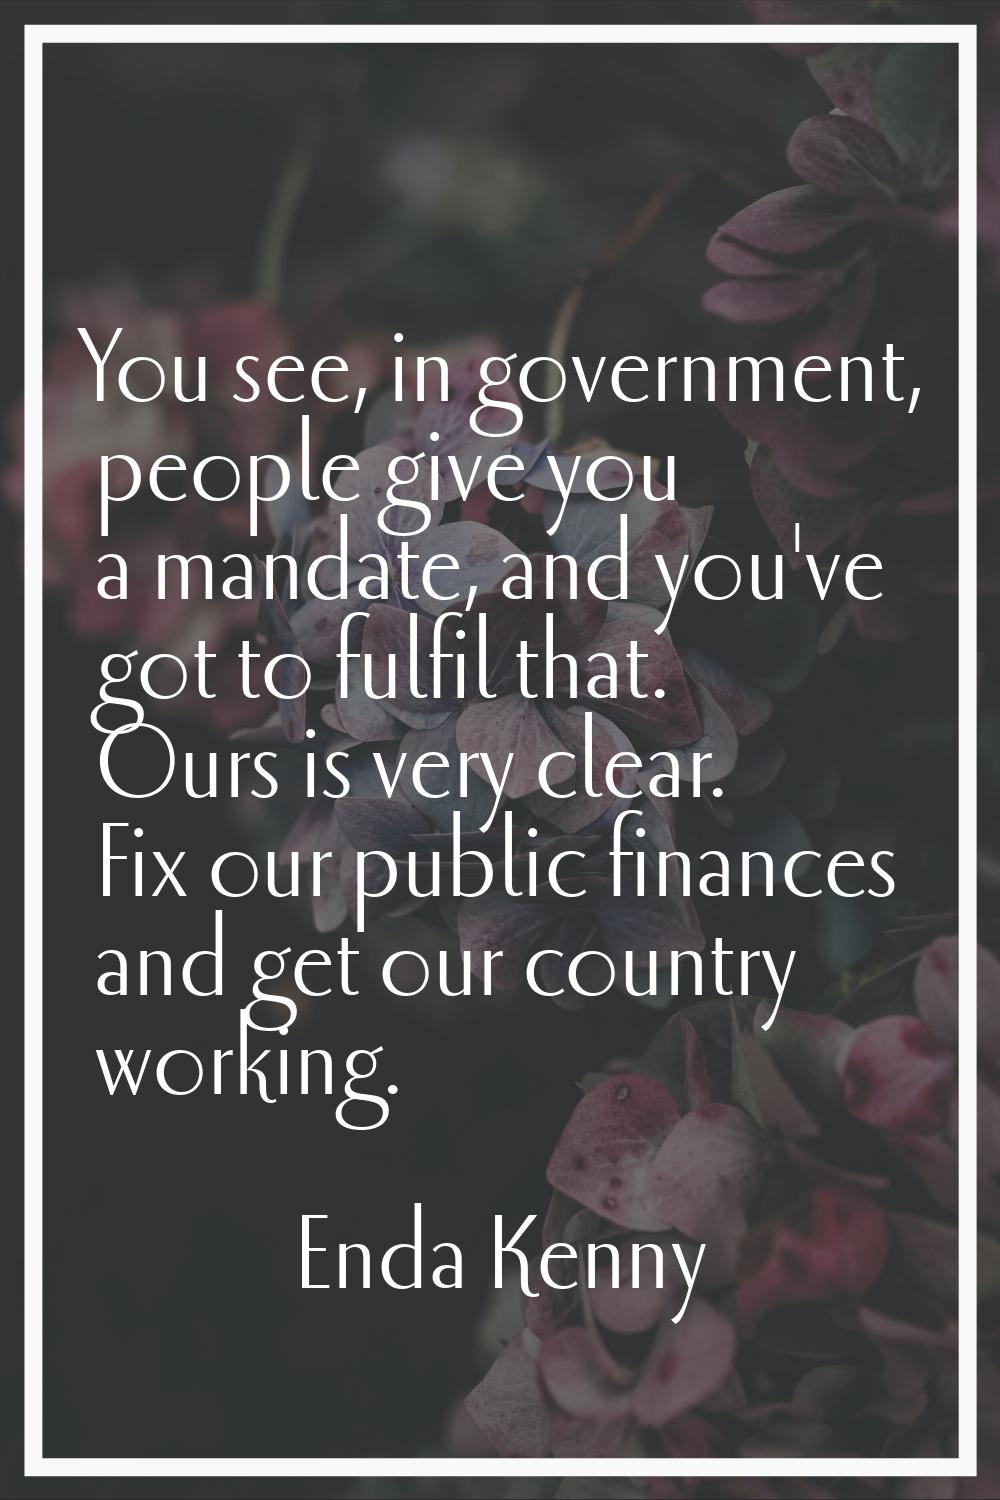 You see, in government, people give you a mandate, and you've got to fulfil that. Ours is very clea